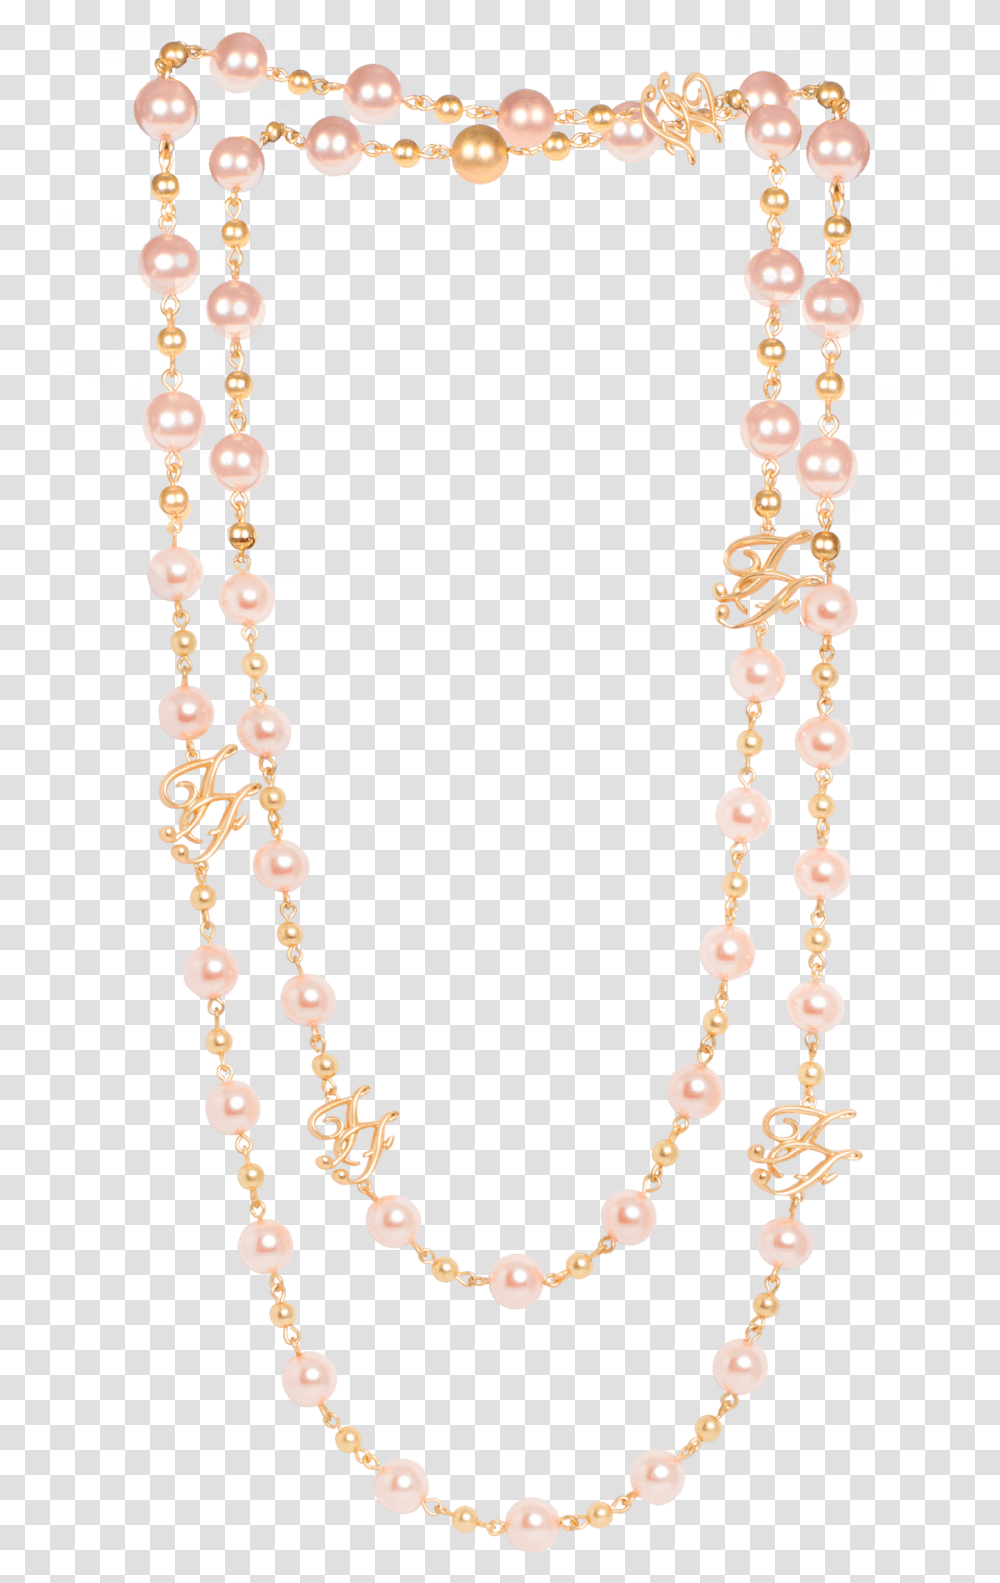 Pink Pearl Necklace Amp Bracelet With Faux Pearls Necklace, Bead Necklace, Jewelry, Ornament, Accessories Transparent Png